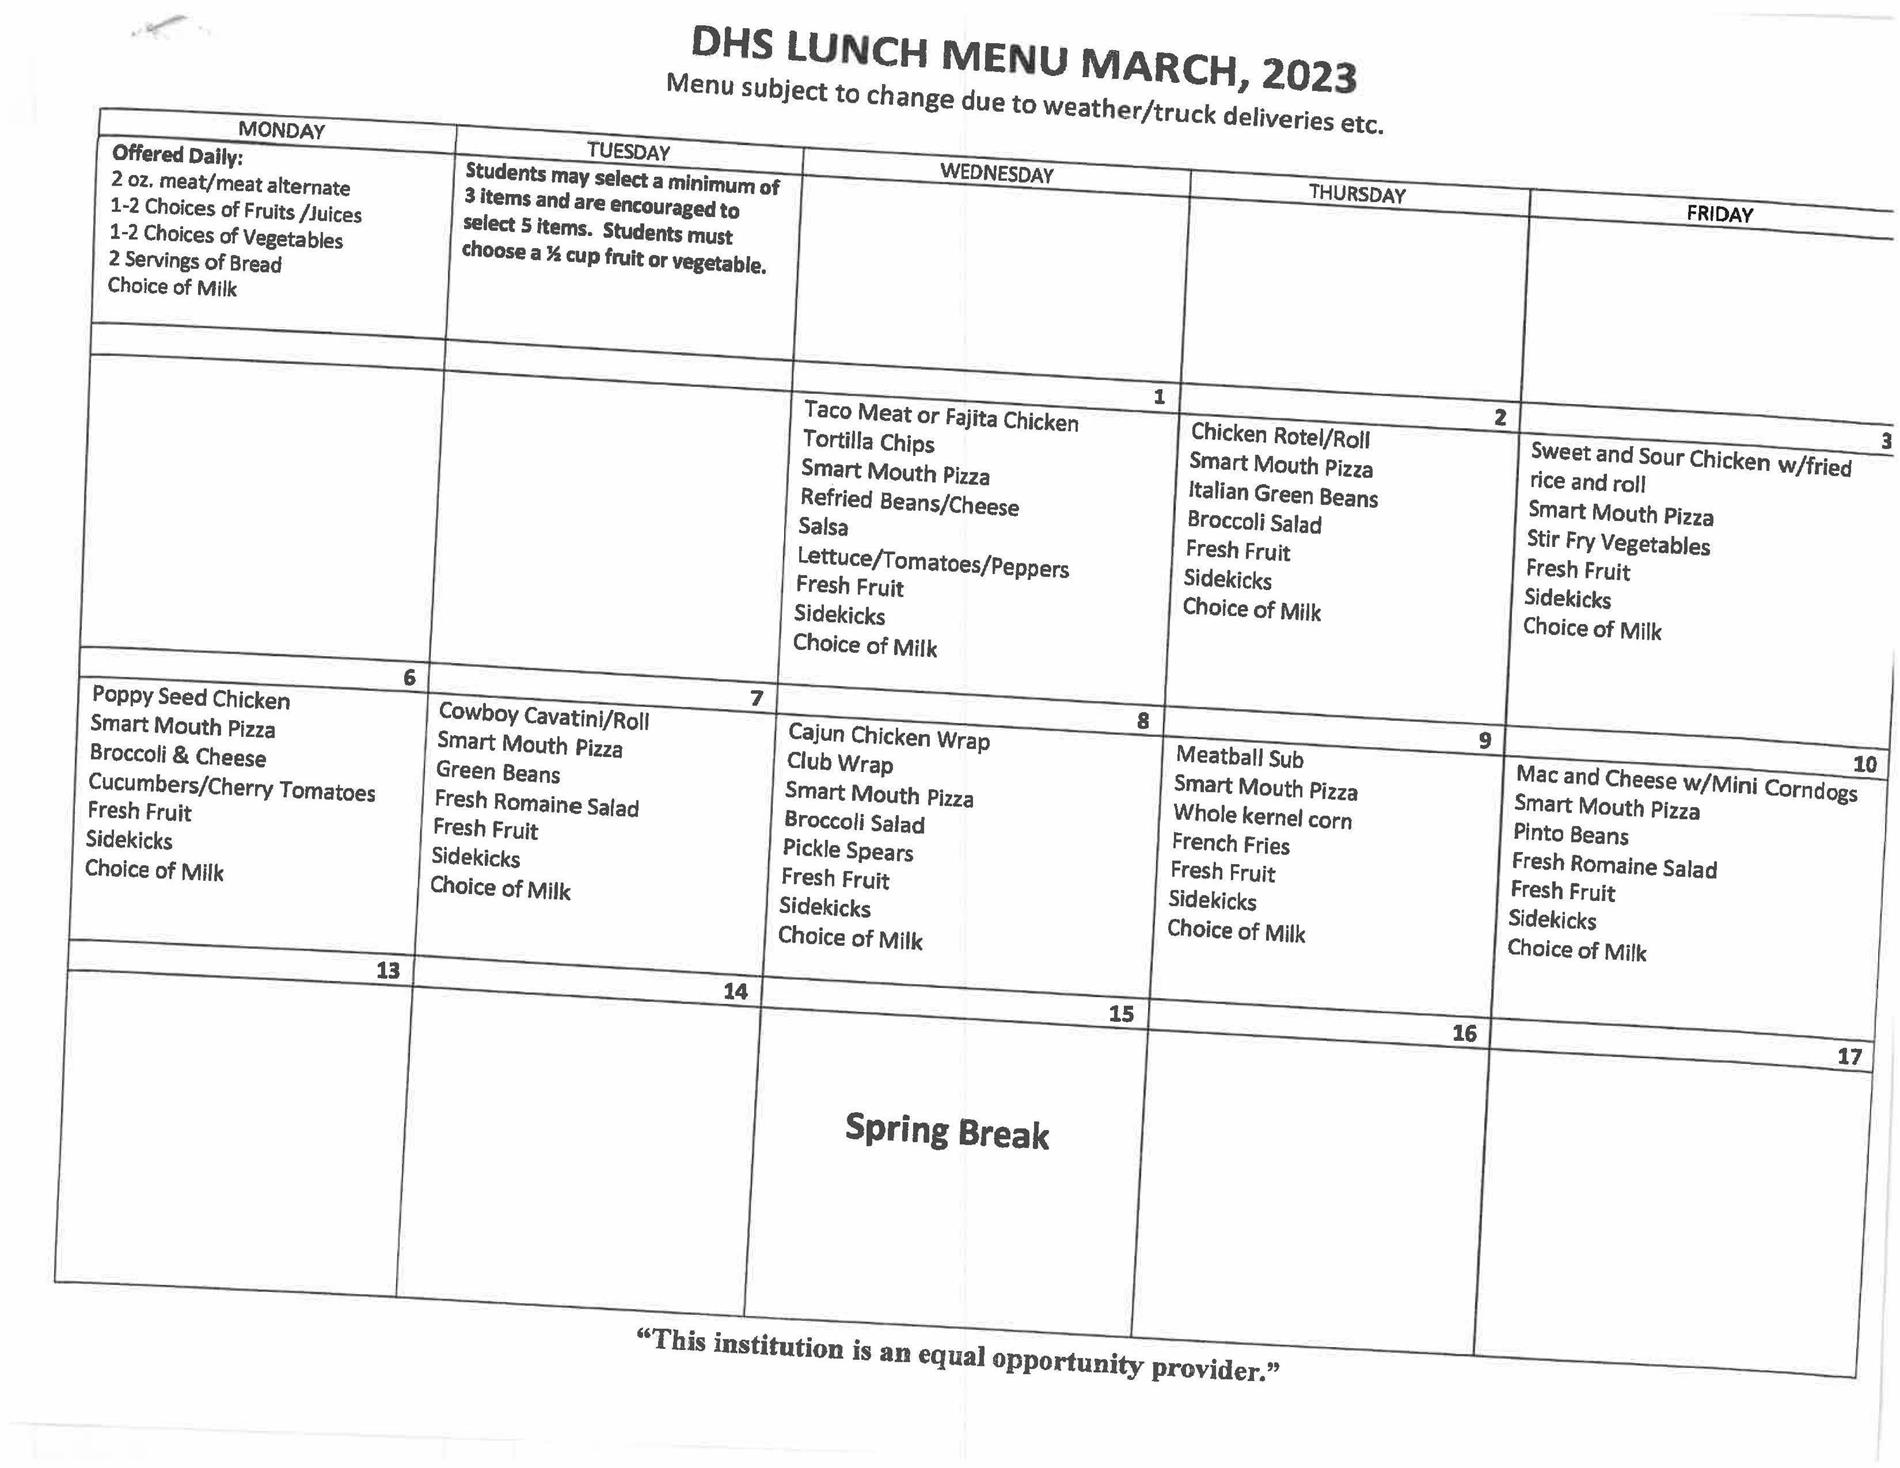 DHS Lunch Menu Page 1